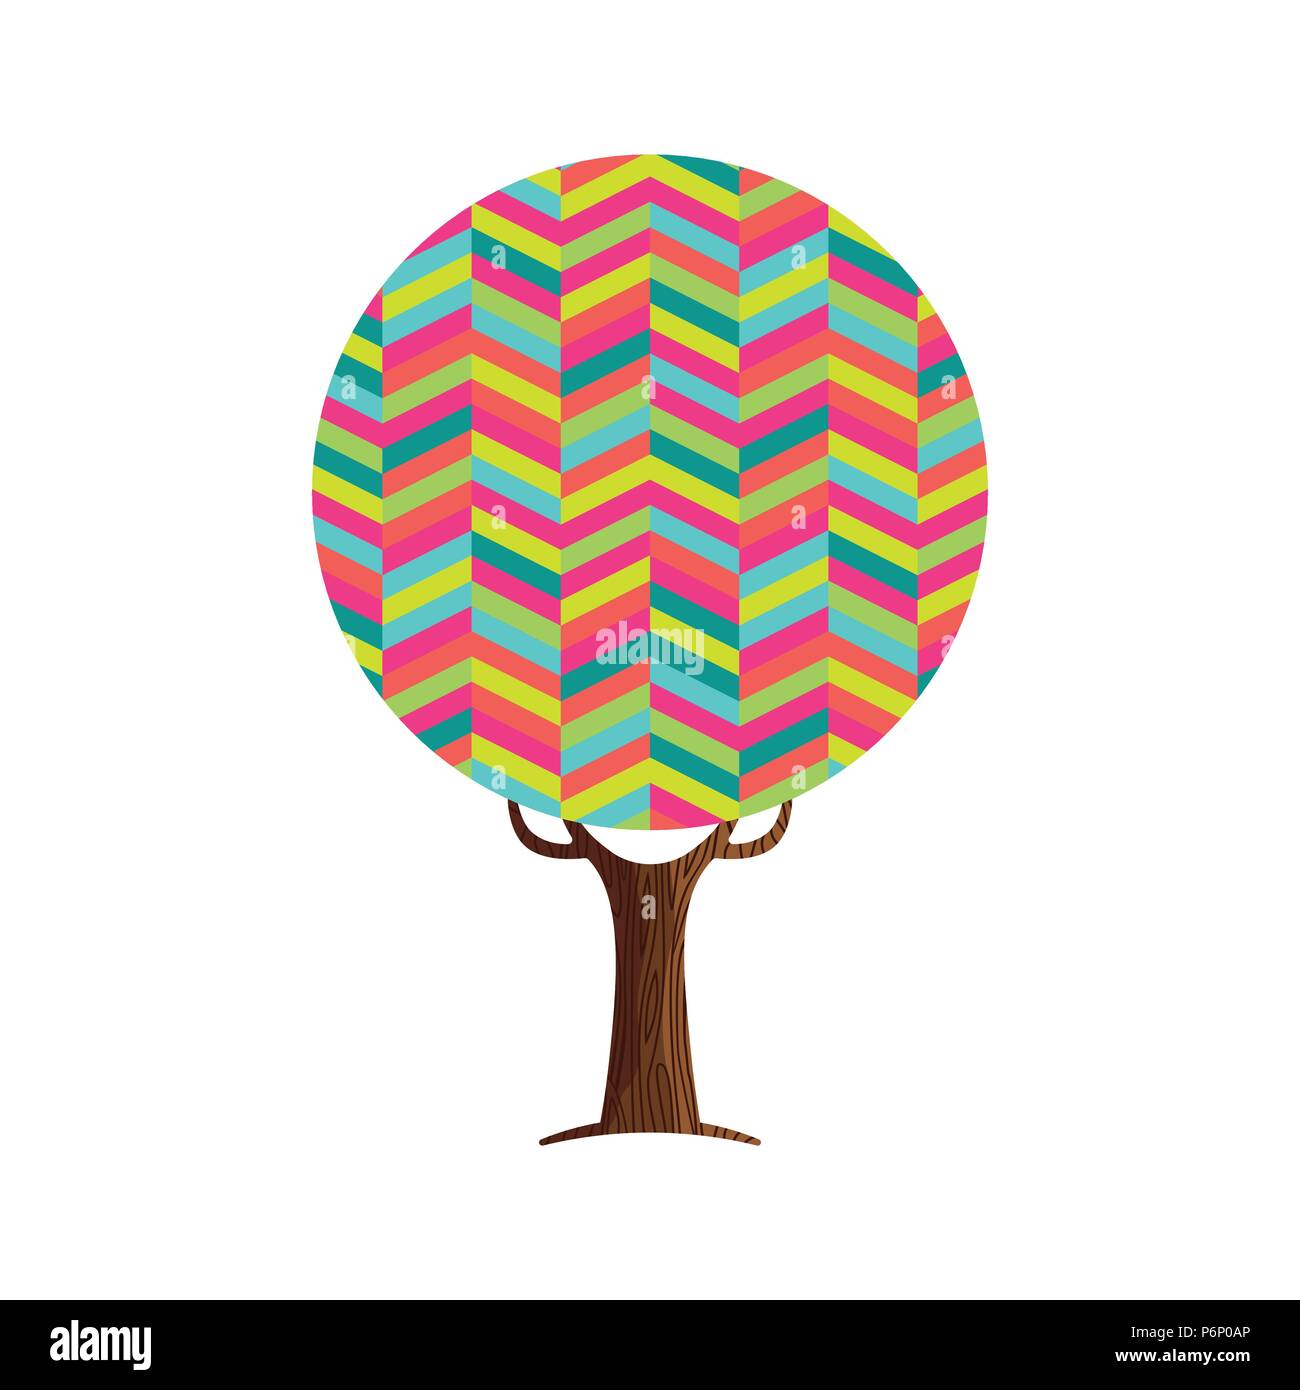 Tree made of colorful abstract shapes. Vibrant color geometric symbols for fun conceptual idea. EPS10 vector. Stock Vector